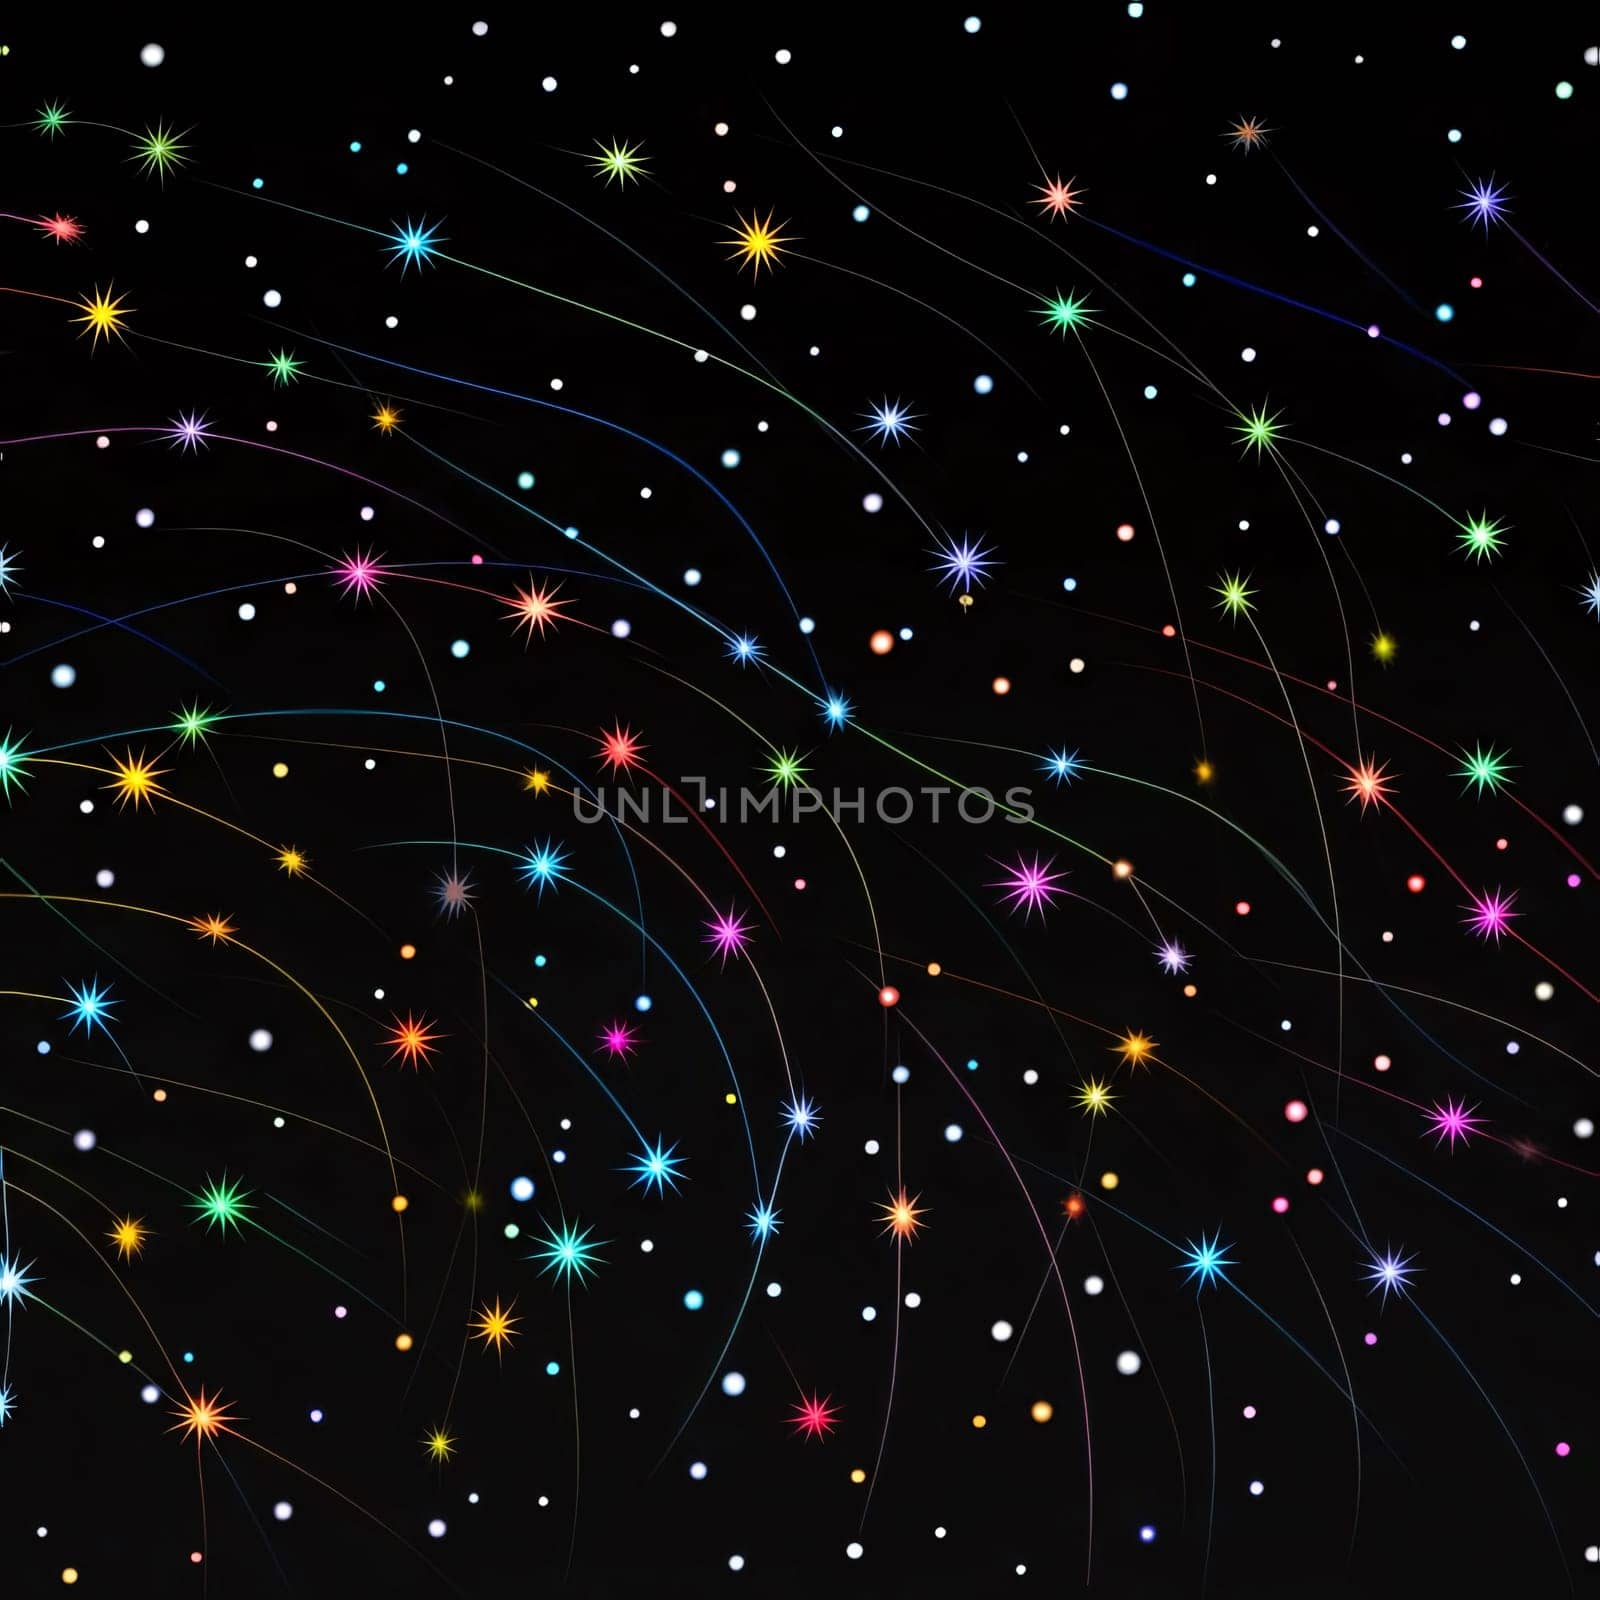 Abstract background design: abstract background with stars and sparkles on a black background.